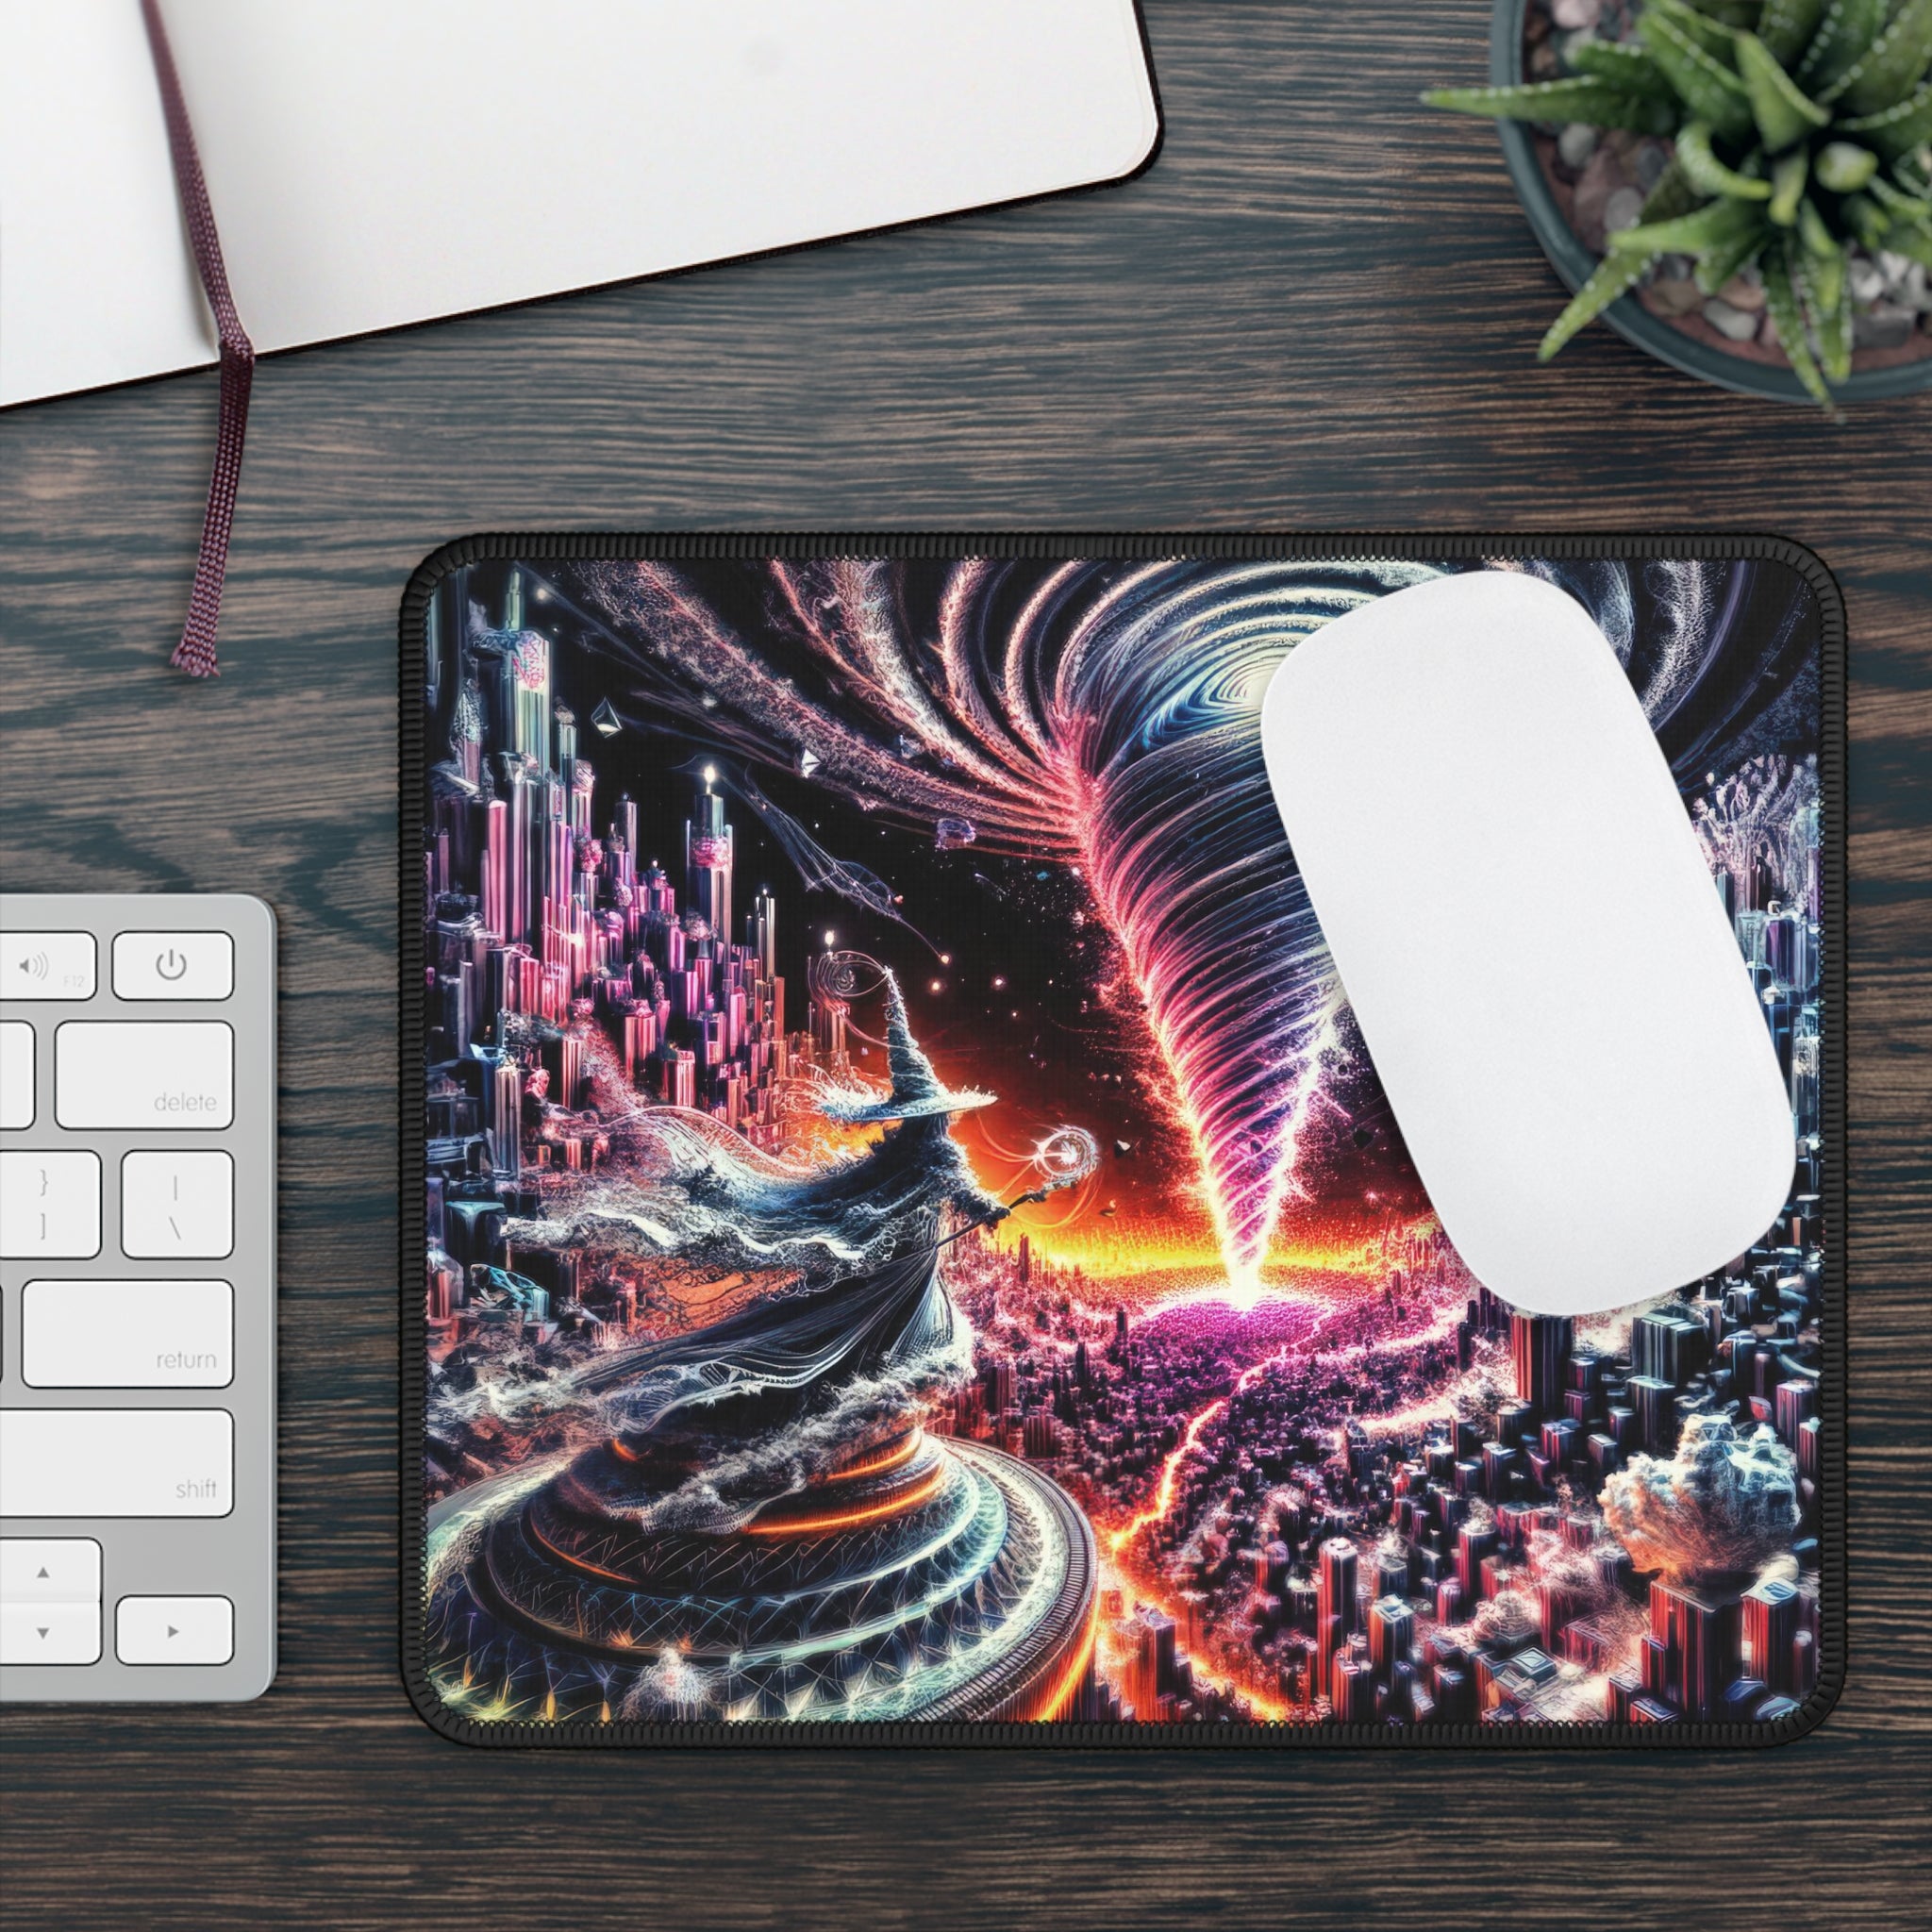 Convergence of Cosmic Symphonies Gaming Mouse Pad